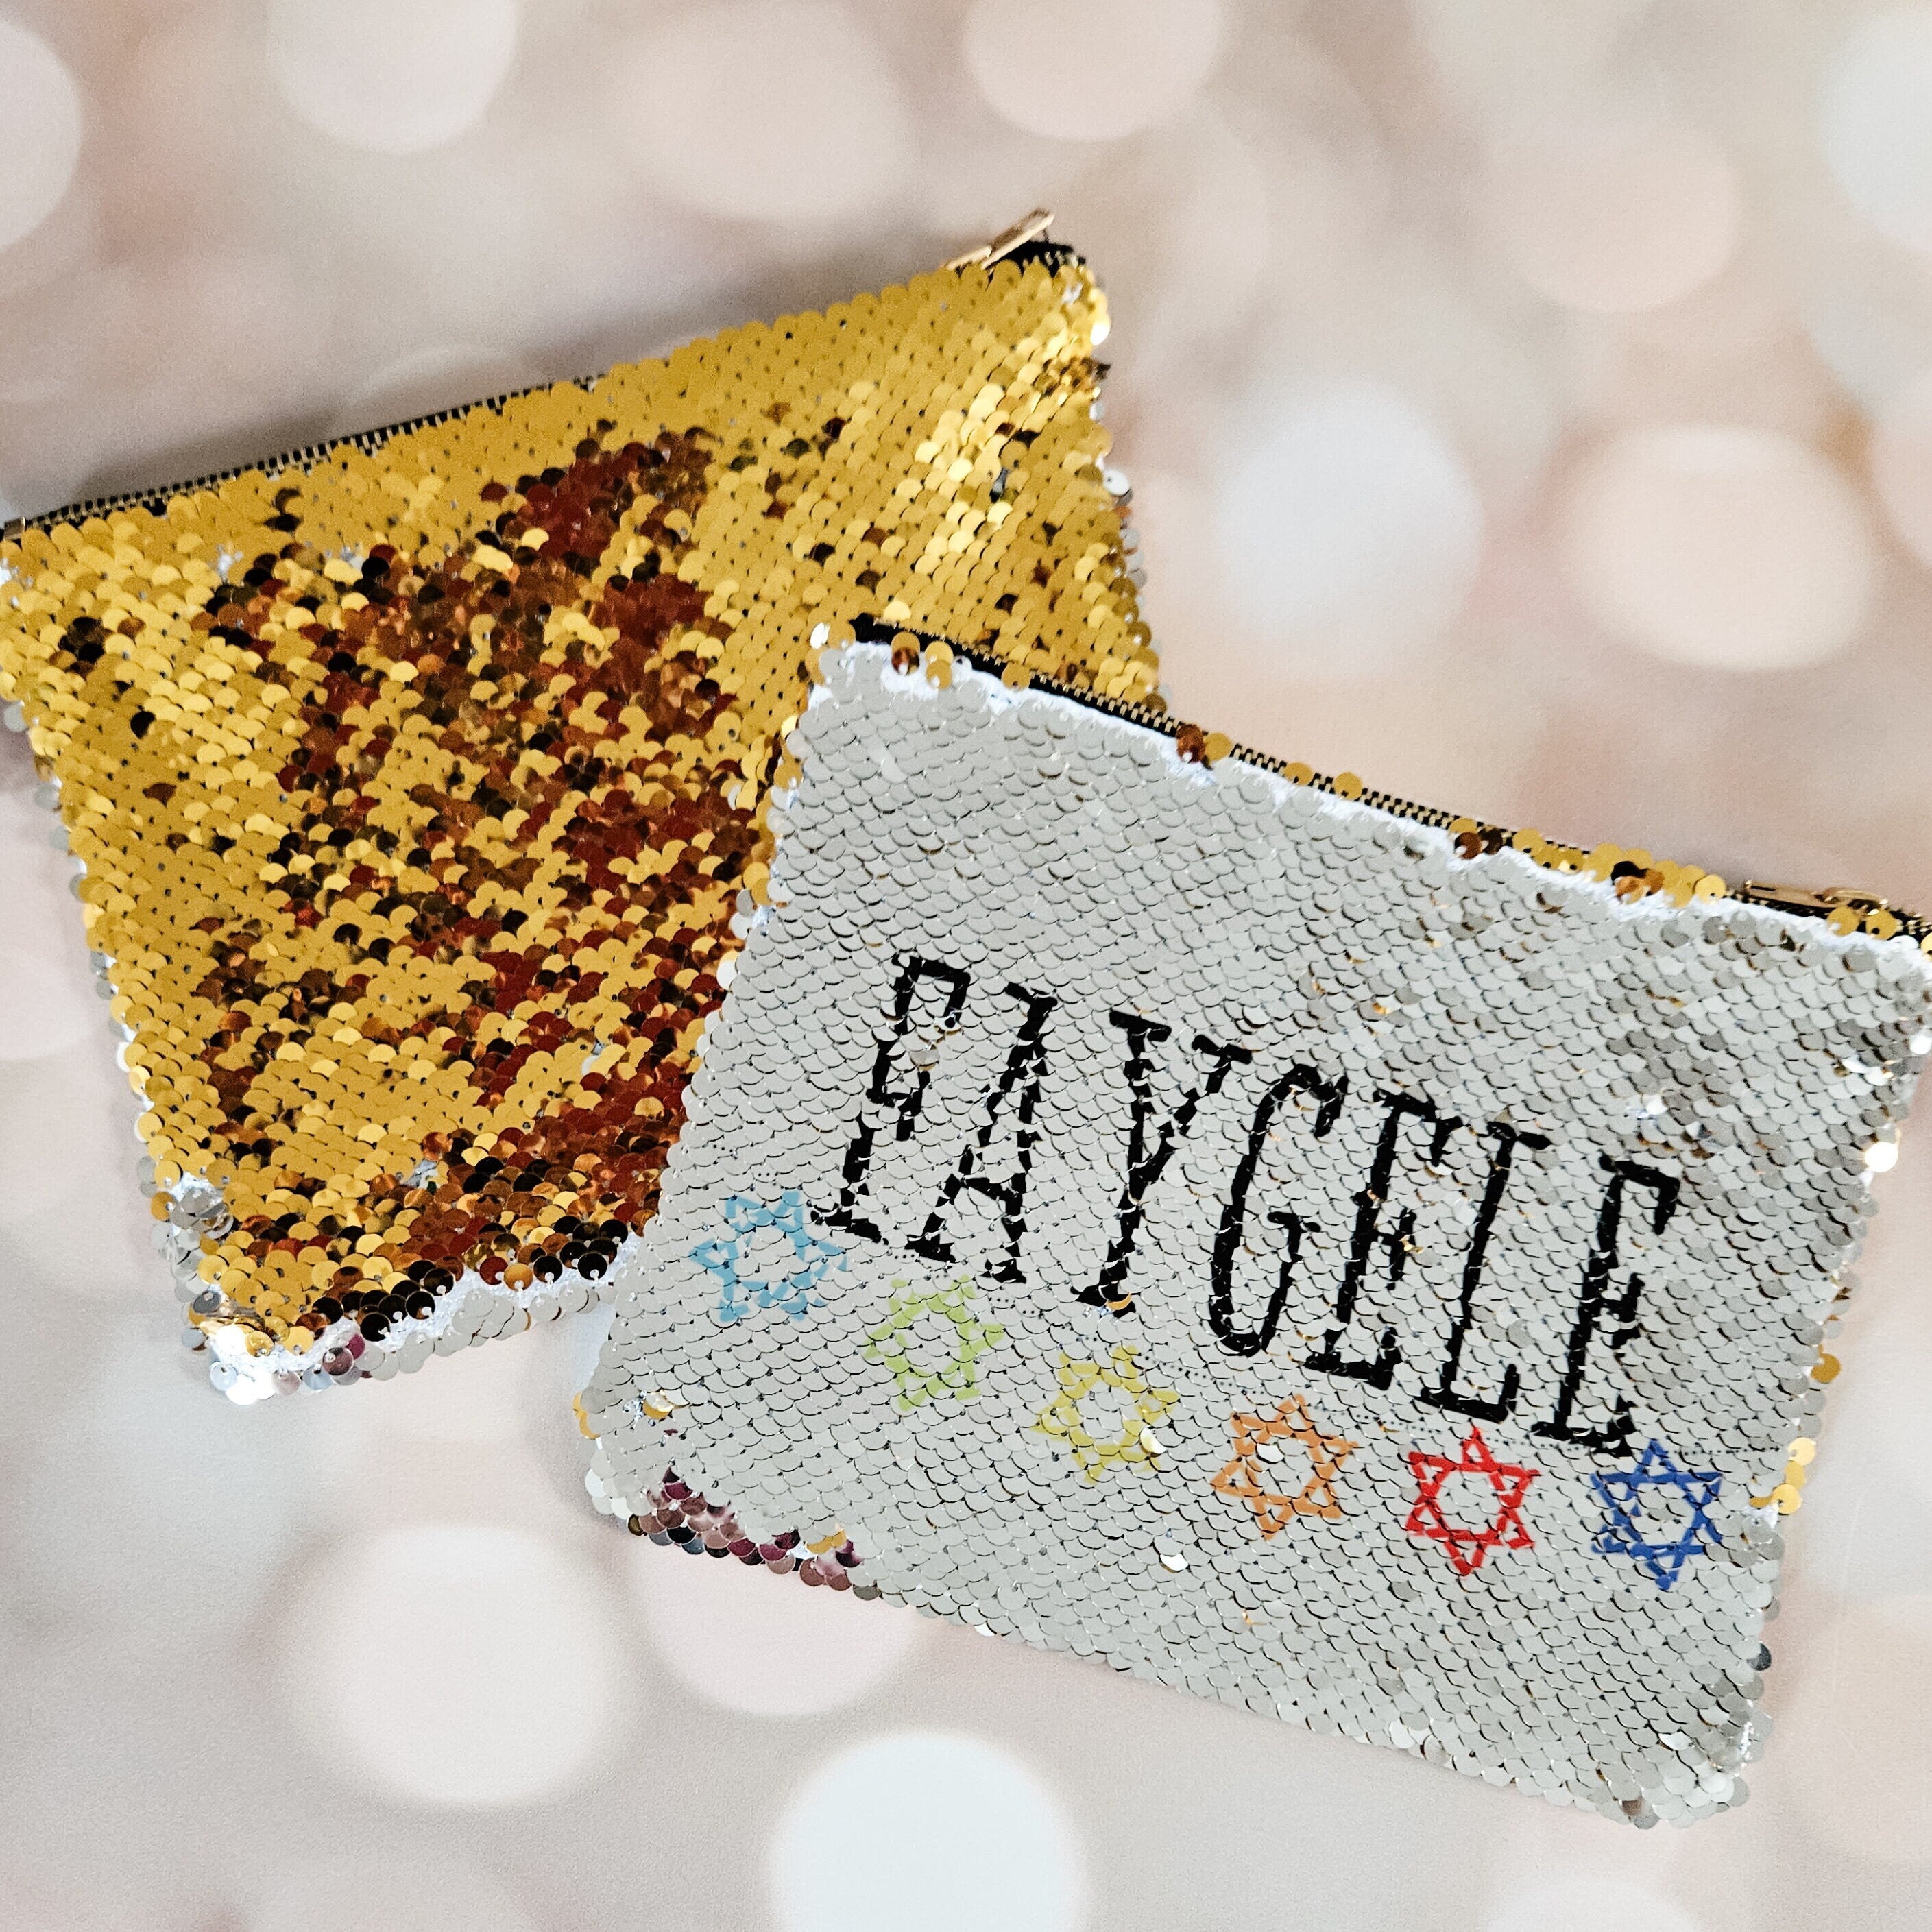 Faygele Sequined Secret Message Cosmetic Bag Salt and Sparkle